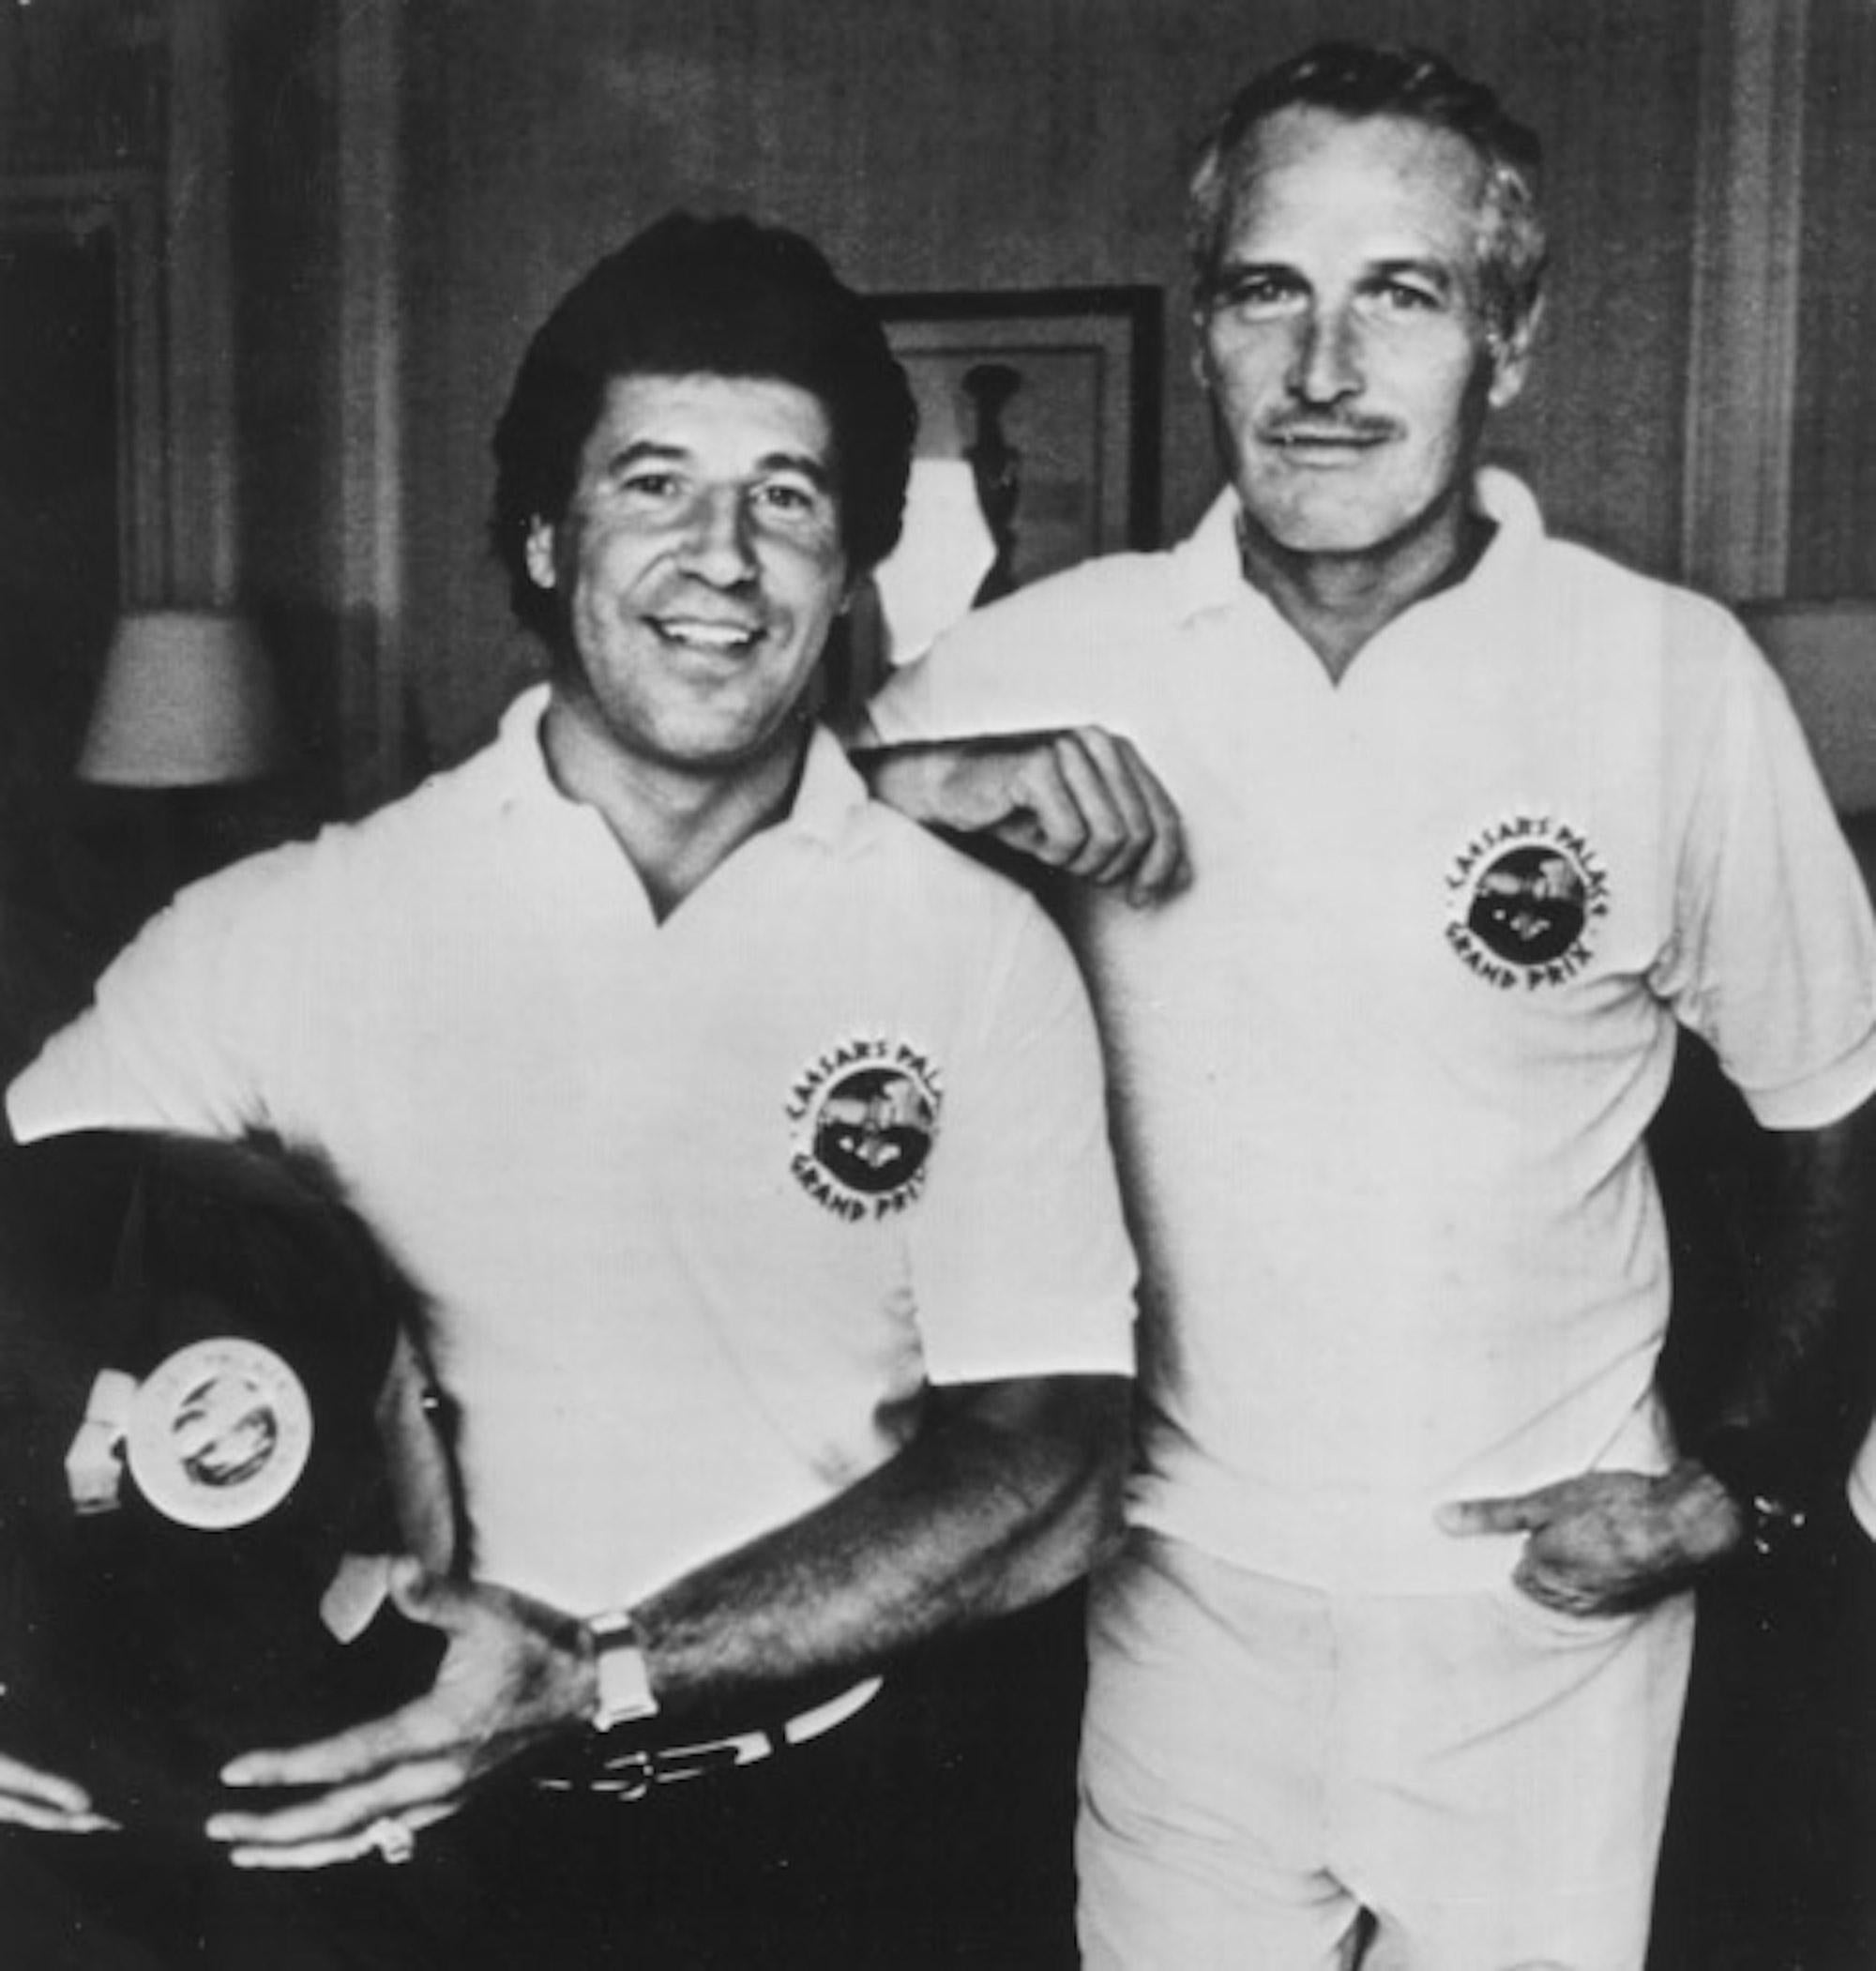 Unknown Figurative Photograph - Portrait of Paul Newman with Mario Andretti- Vintage Photo -1981